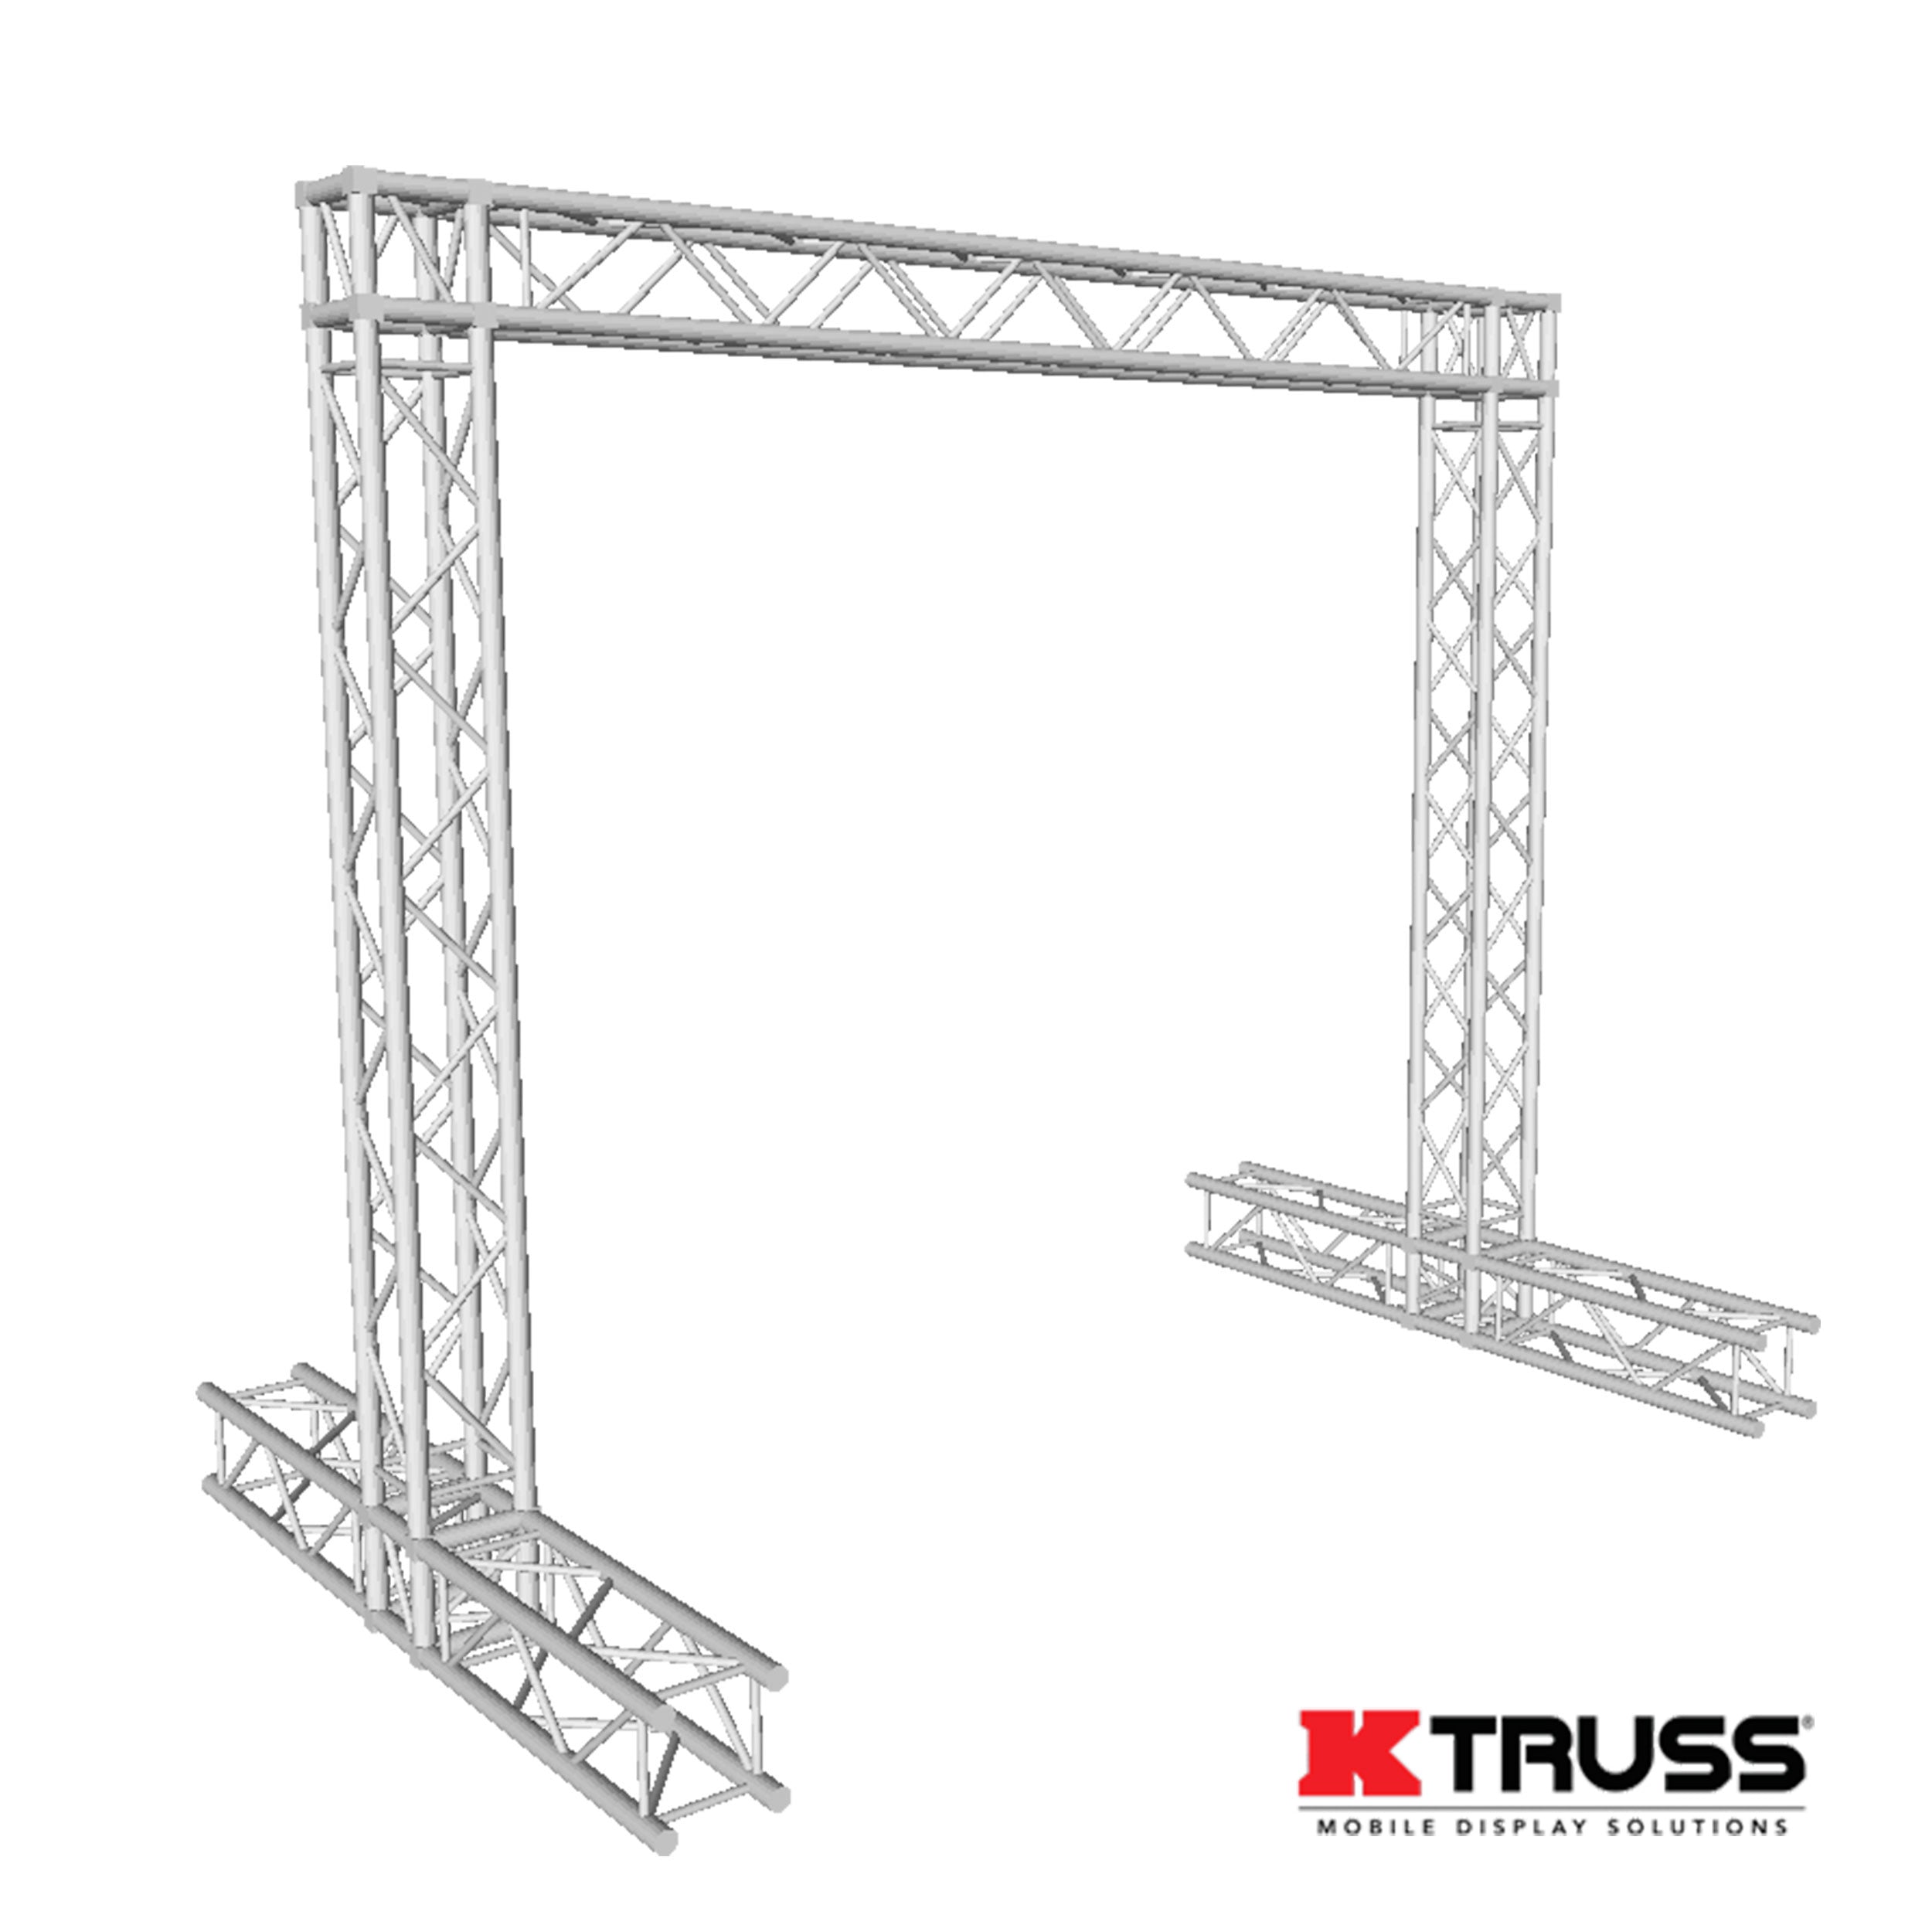 Pro X 8x8' Ft K-Truss Economy Aluminum Truss Outdoor Banner Display System - Banner Not Included KT-SQ8X8DISPLAY